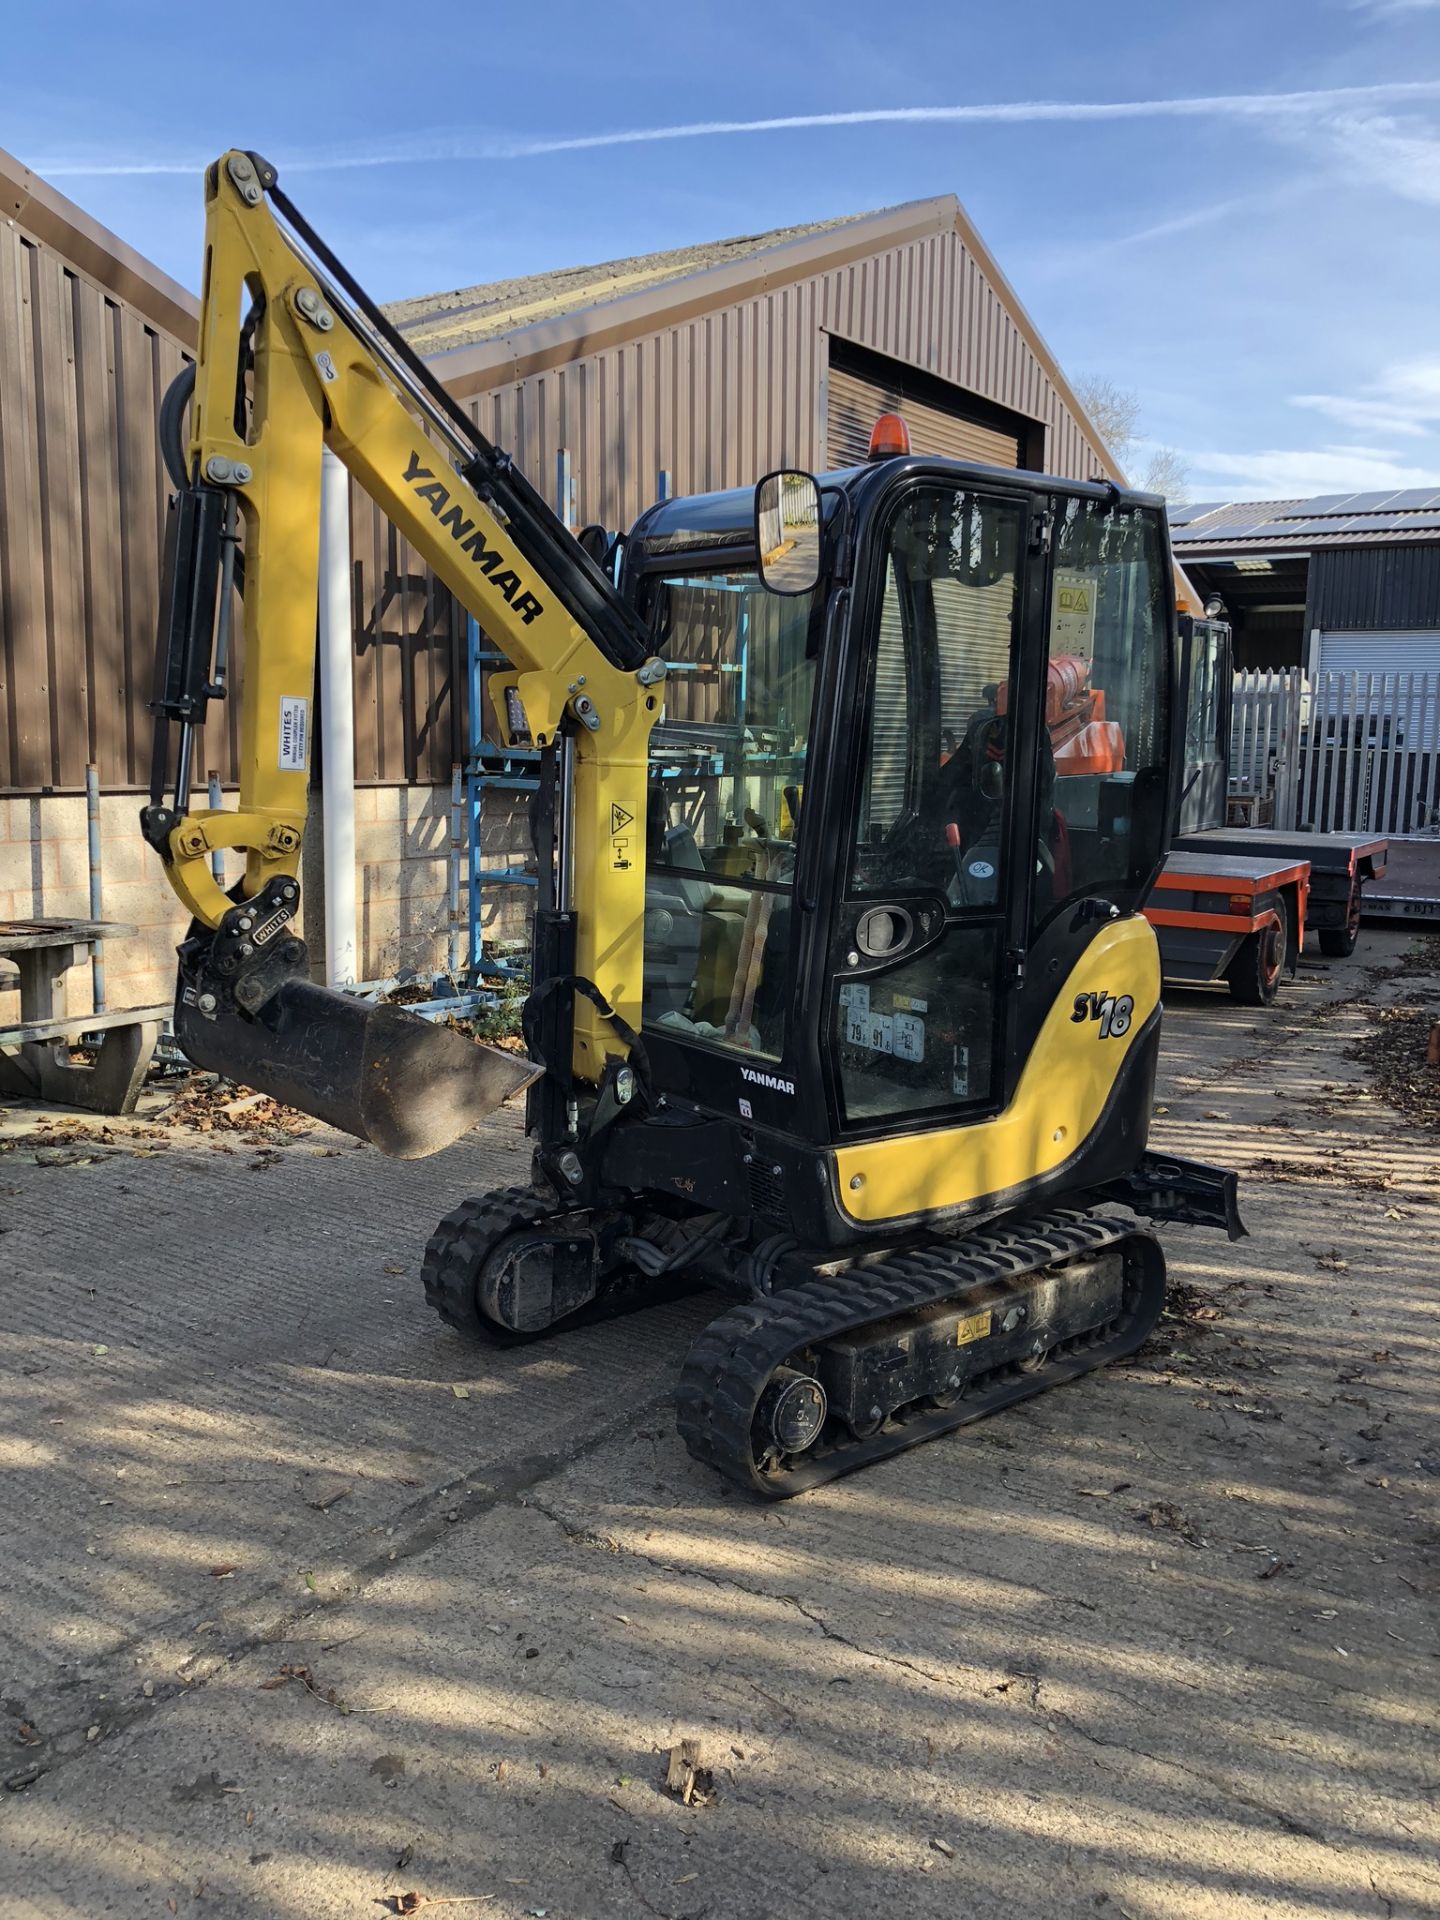 Yanmar SV18 CR Mini Excavator, Rubber Tracks, Serial No. G6127 (2017/10), with Quick Hitch